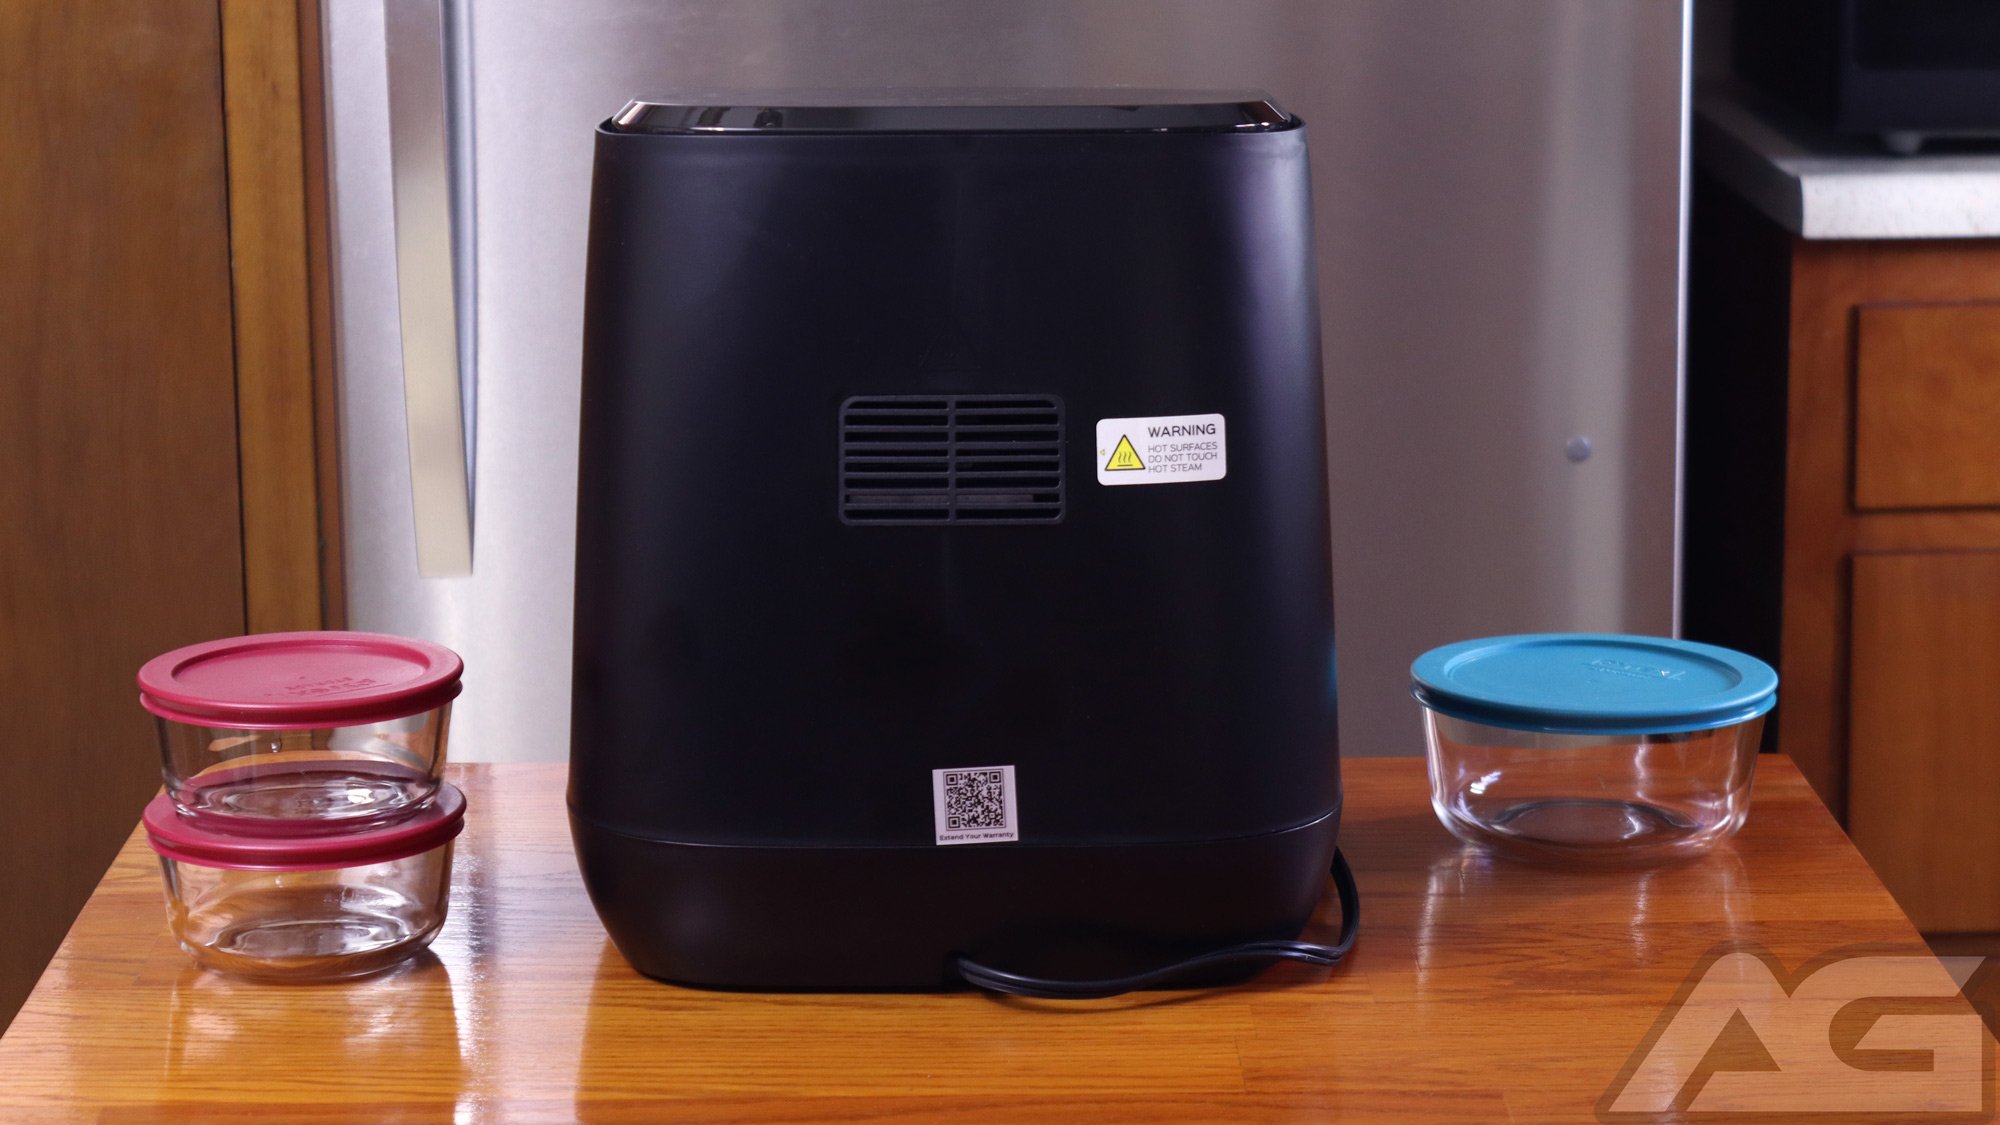 https://www.androidguys.com/wp-content/uploads/2022/10/Dreo-Air-Fryer-Pro-Max-back.jpg